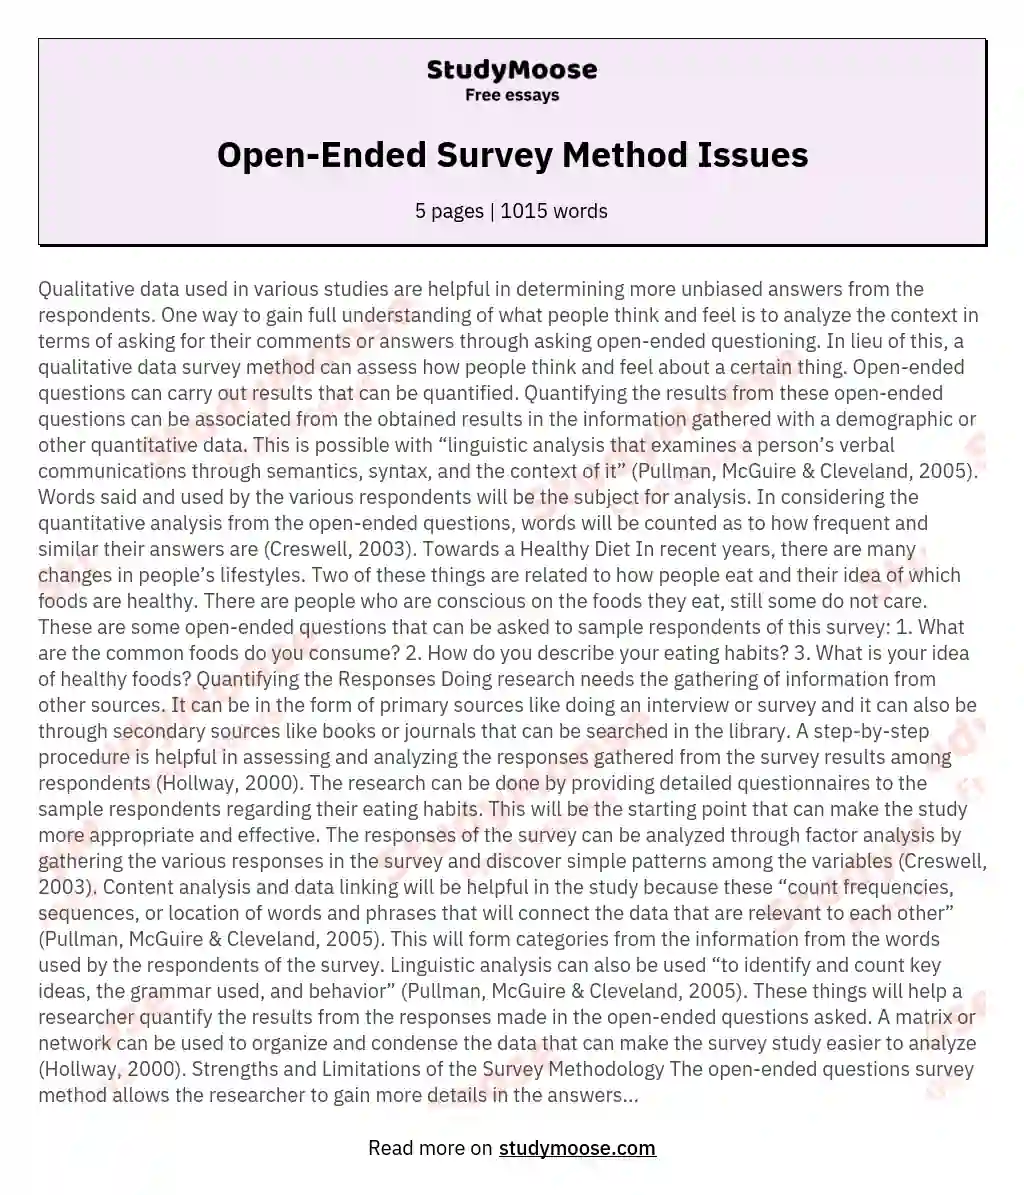 Open-Ended Survey Method Issues essay